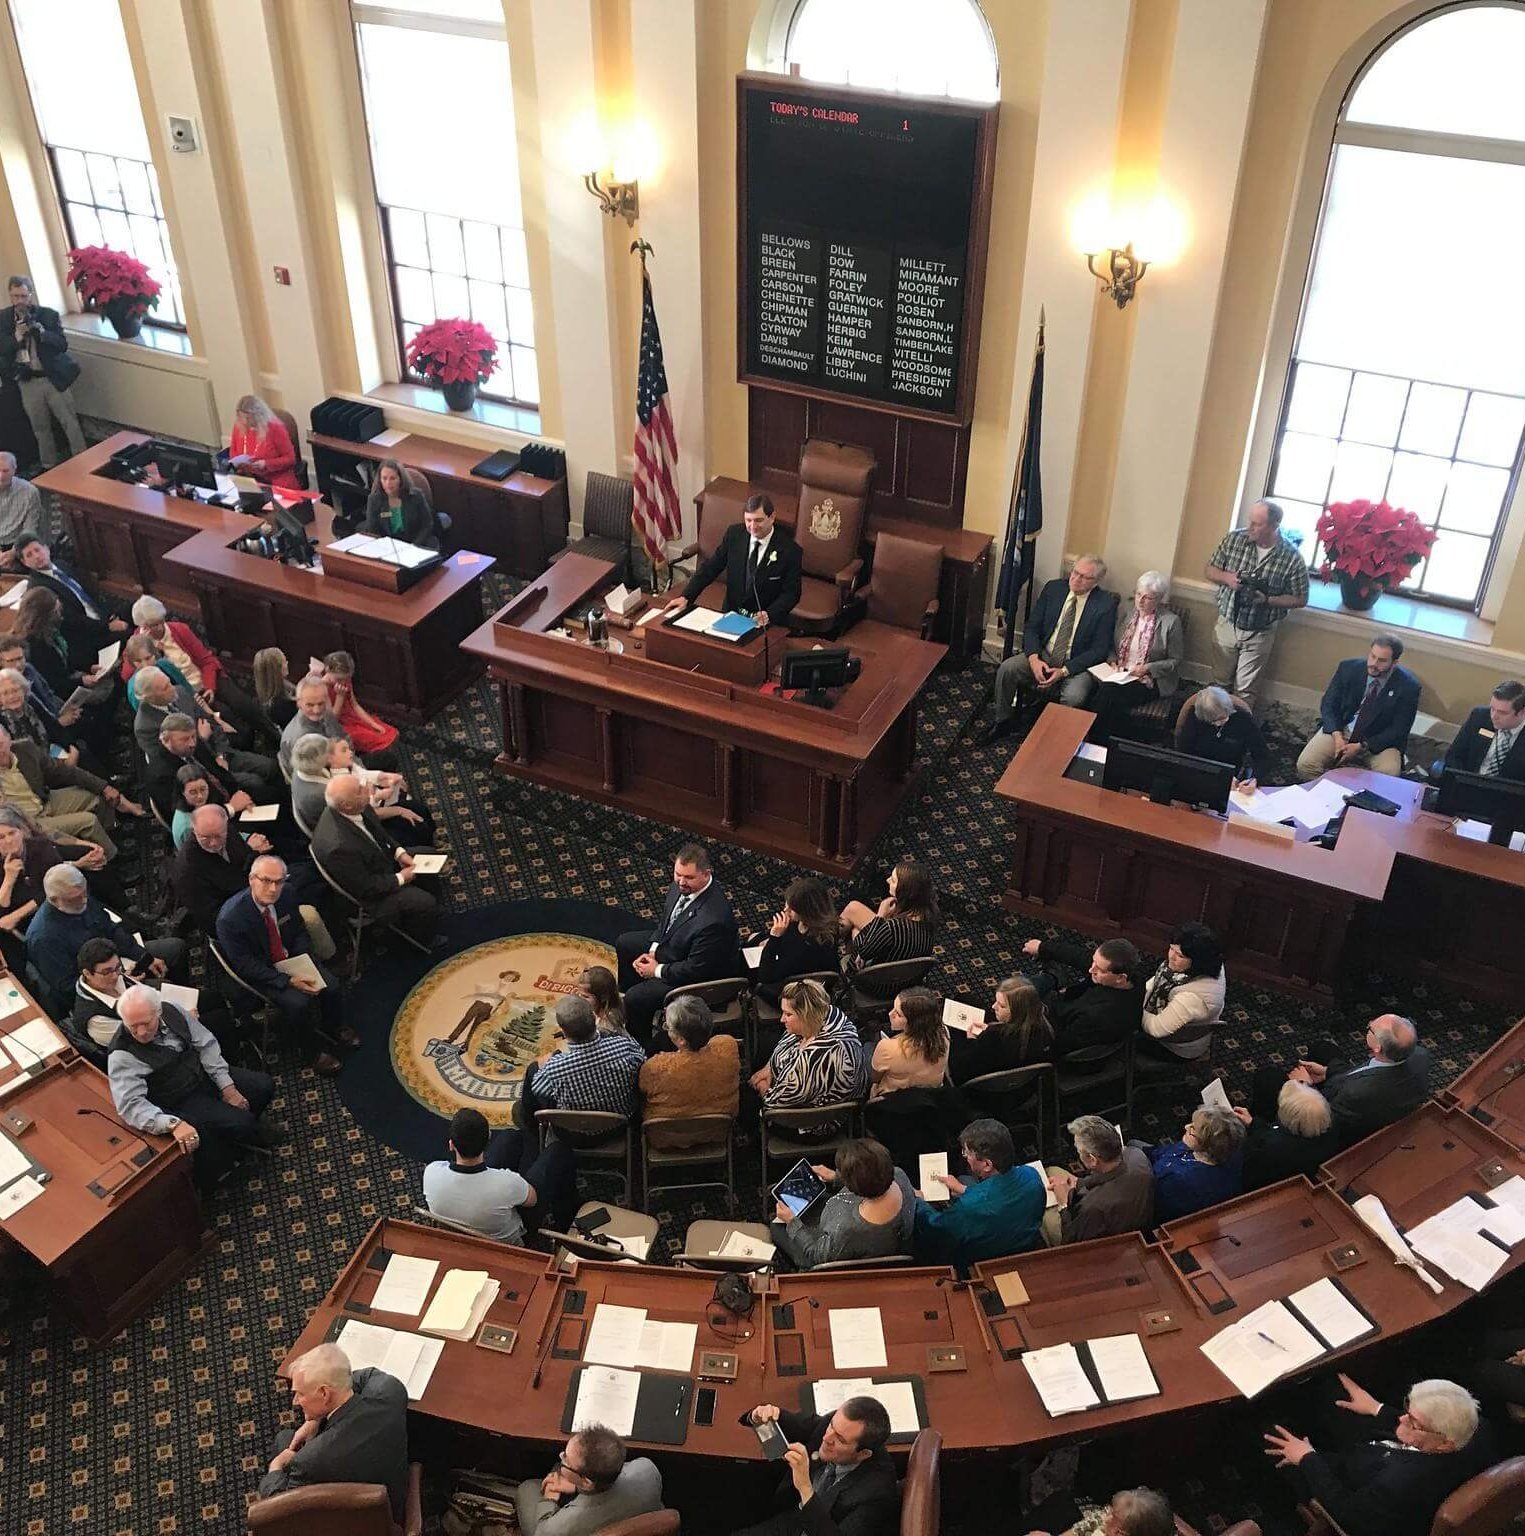 MAINE PASSES BILLS FUNDING OF ABORTION AND MANDATING VACCINATIONS